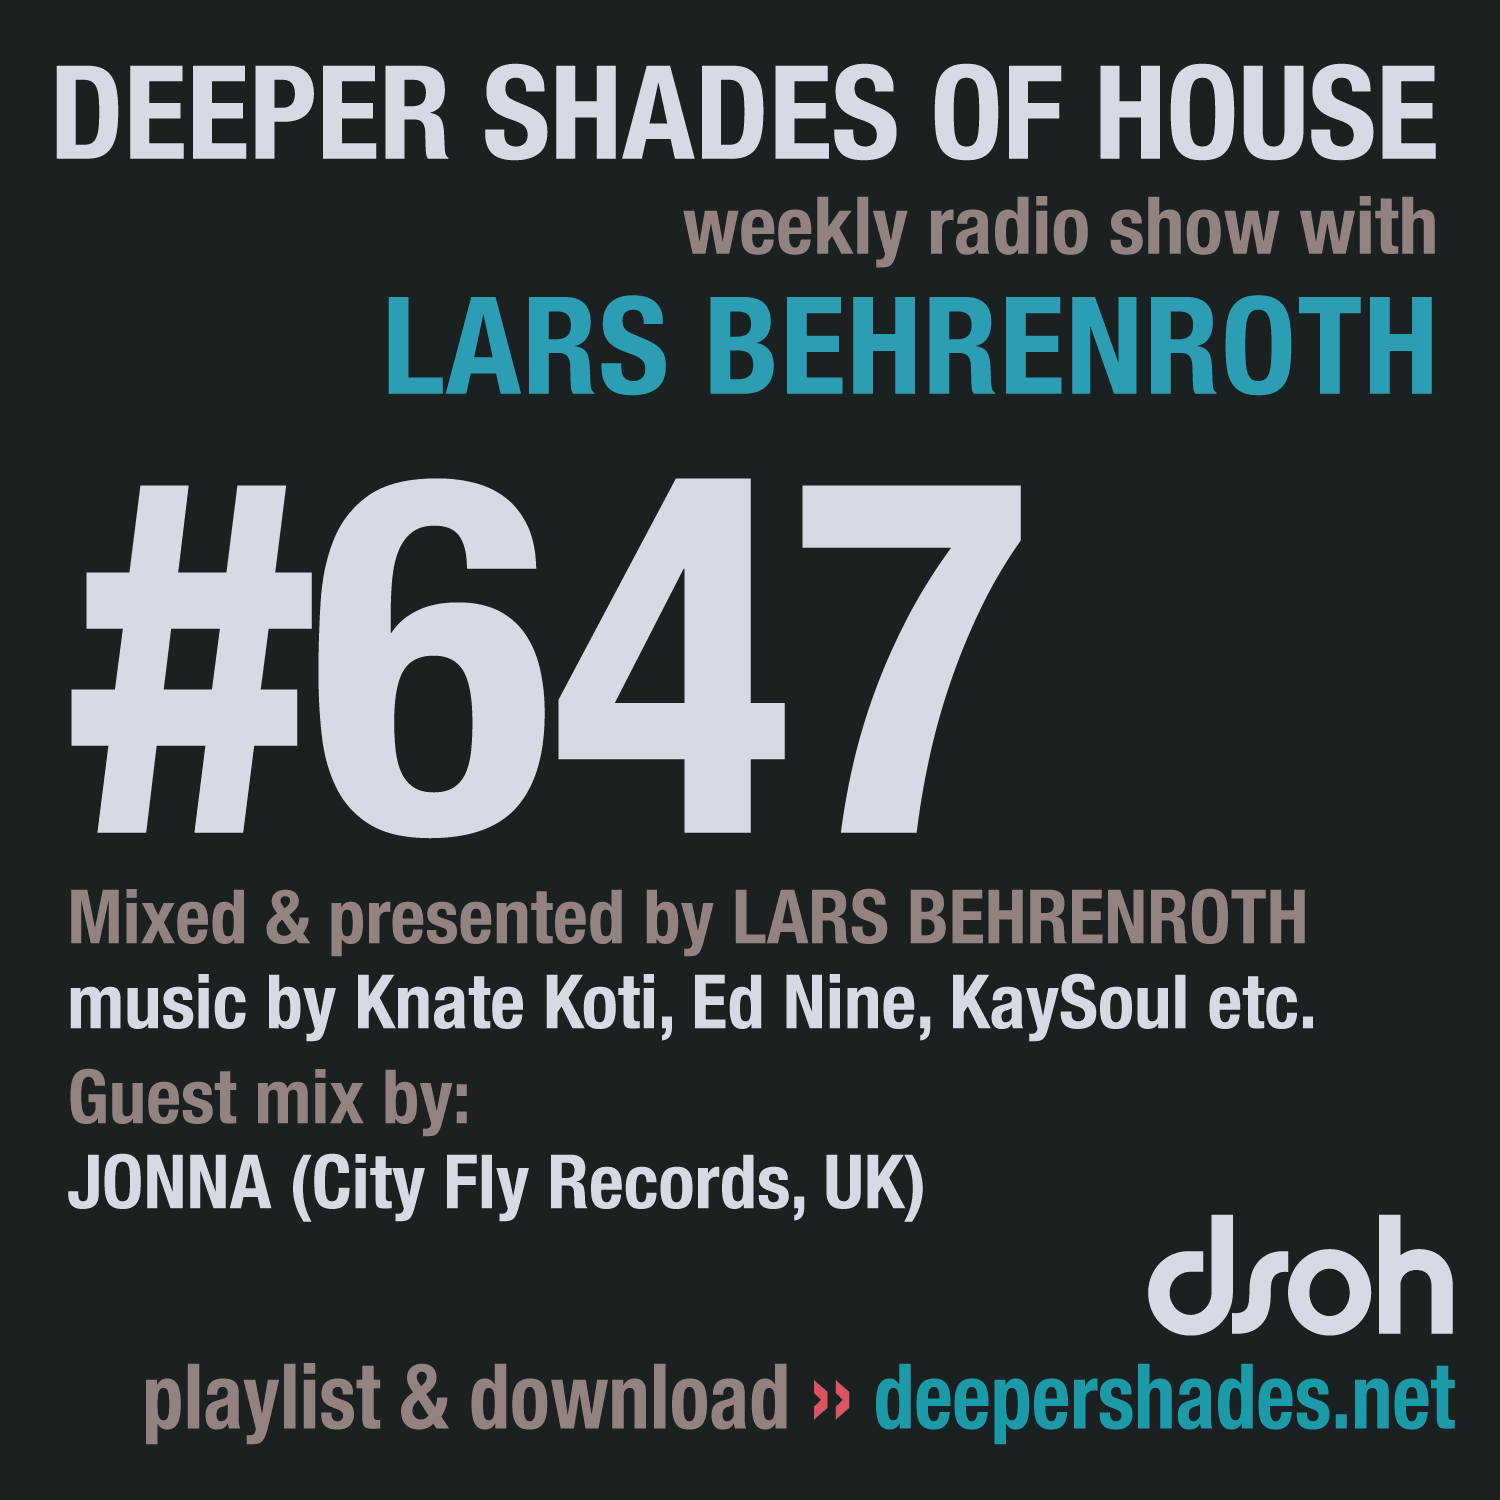 Deeper Shades Of House 647